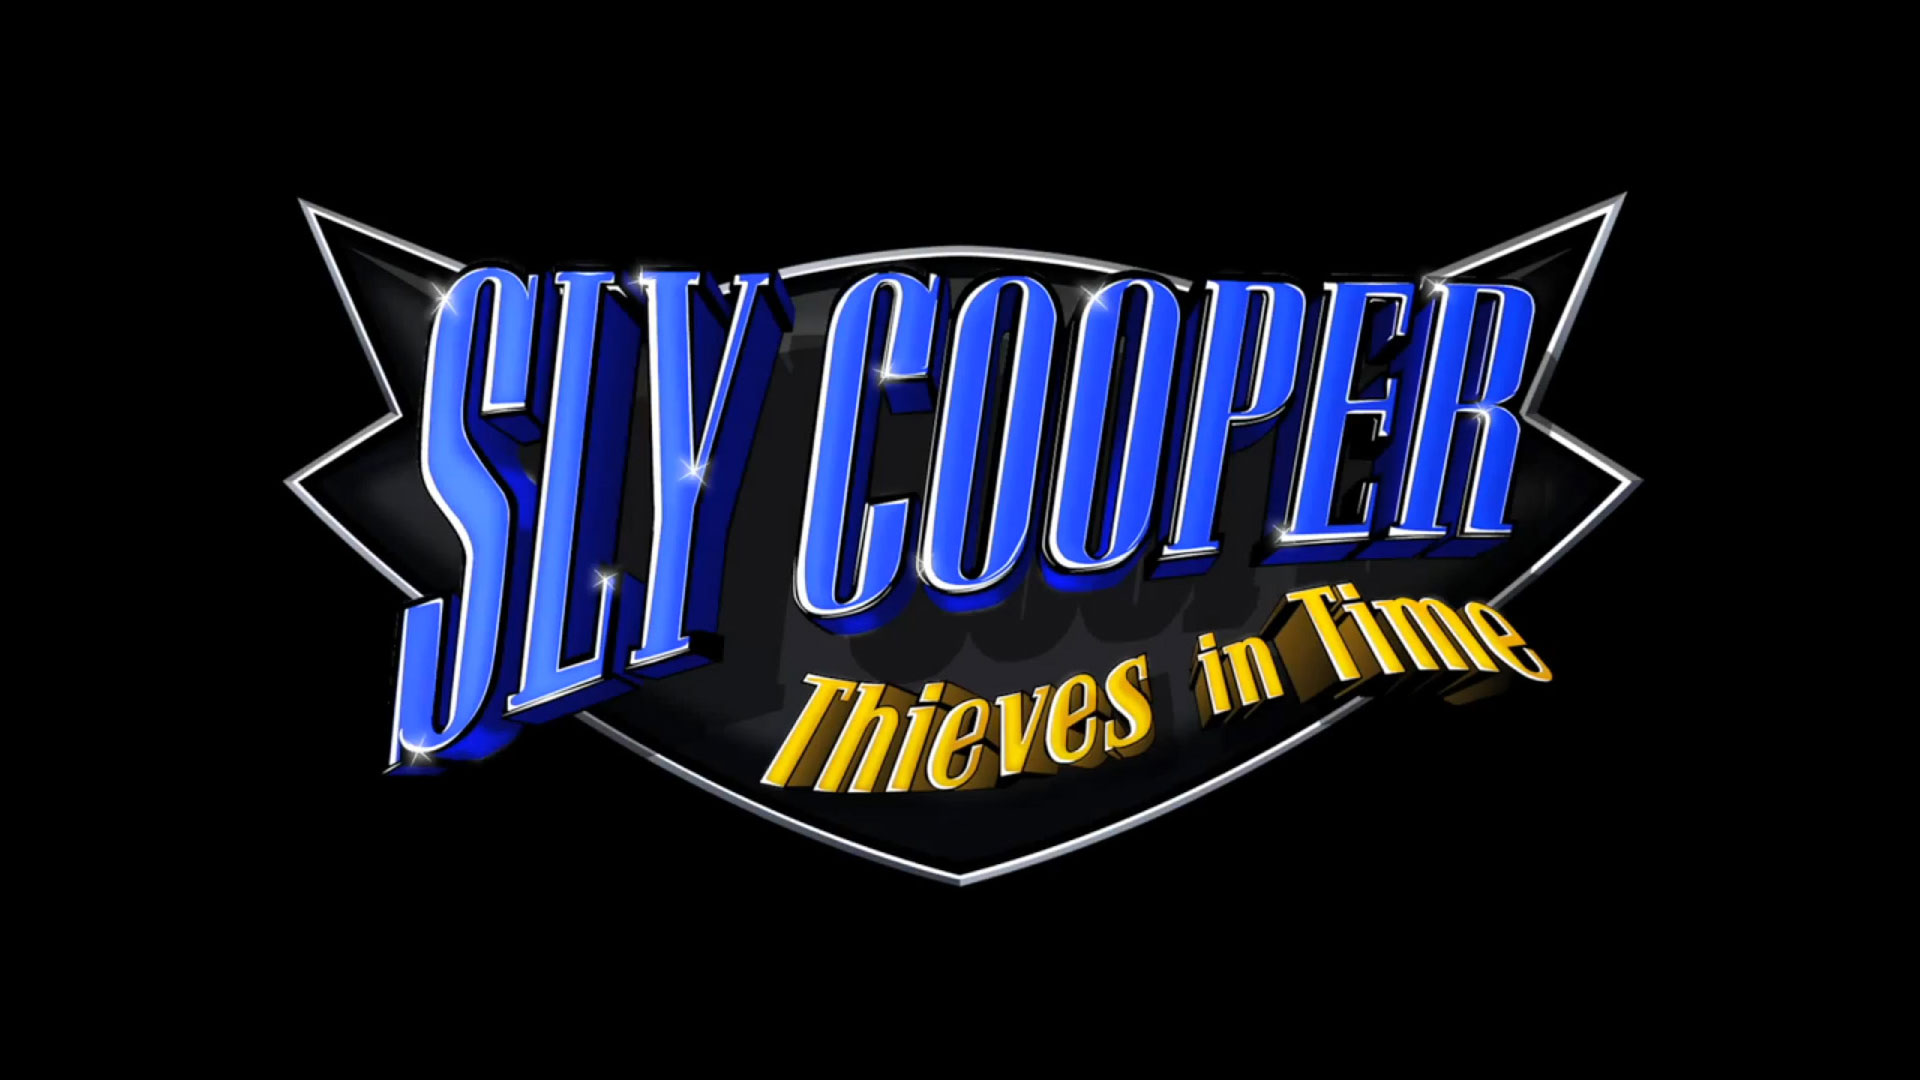 Sly Cooper Thieves in Time Wallpapers in HD 1920x1080